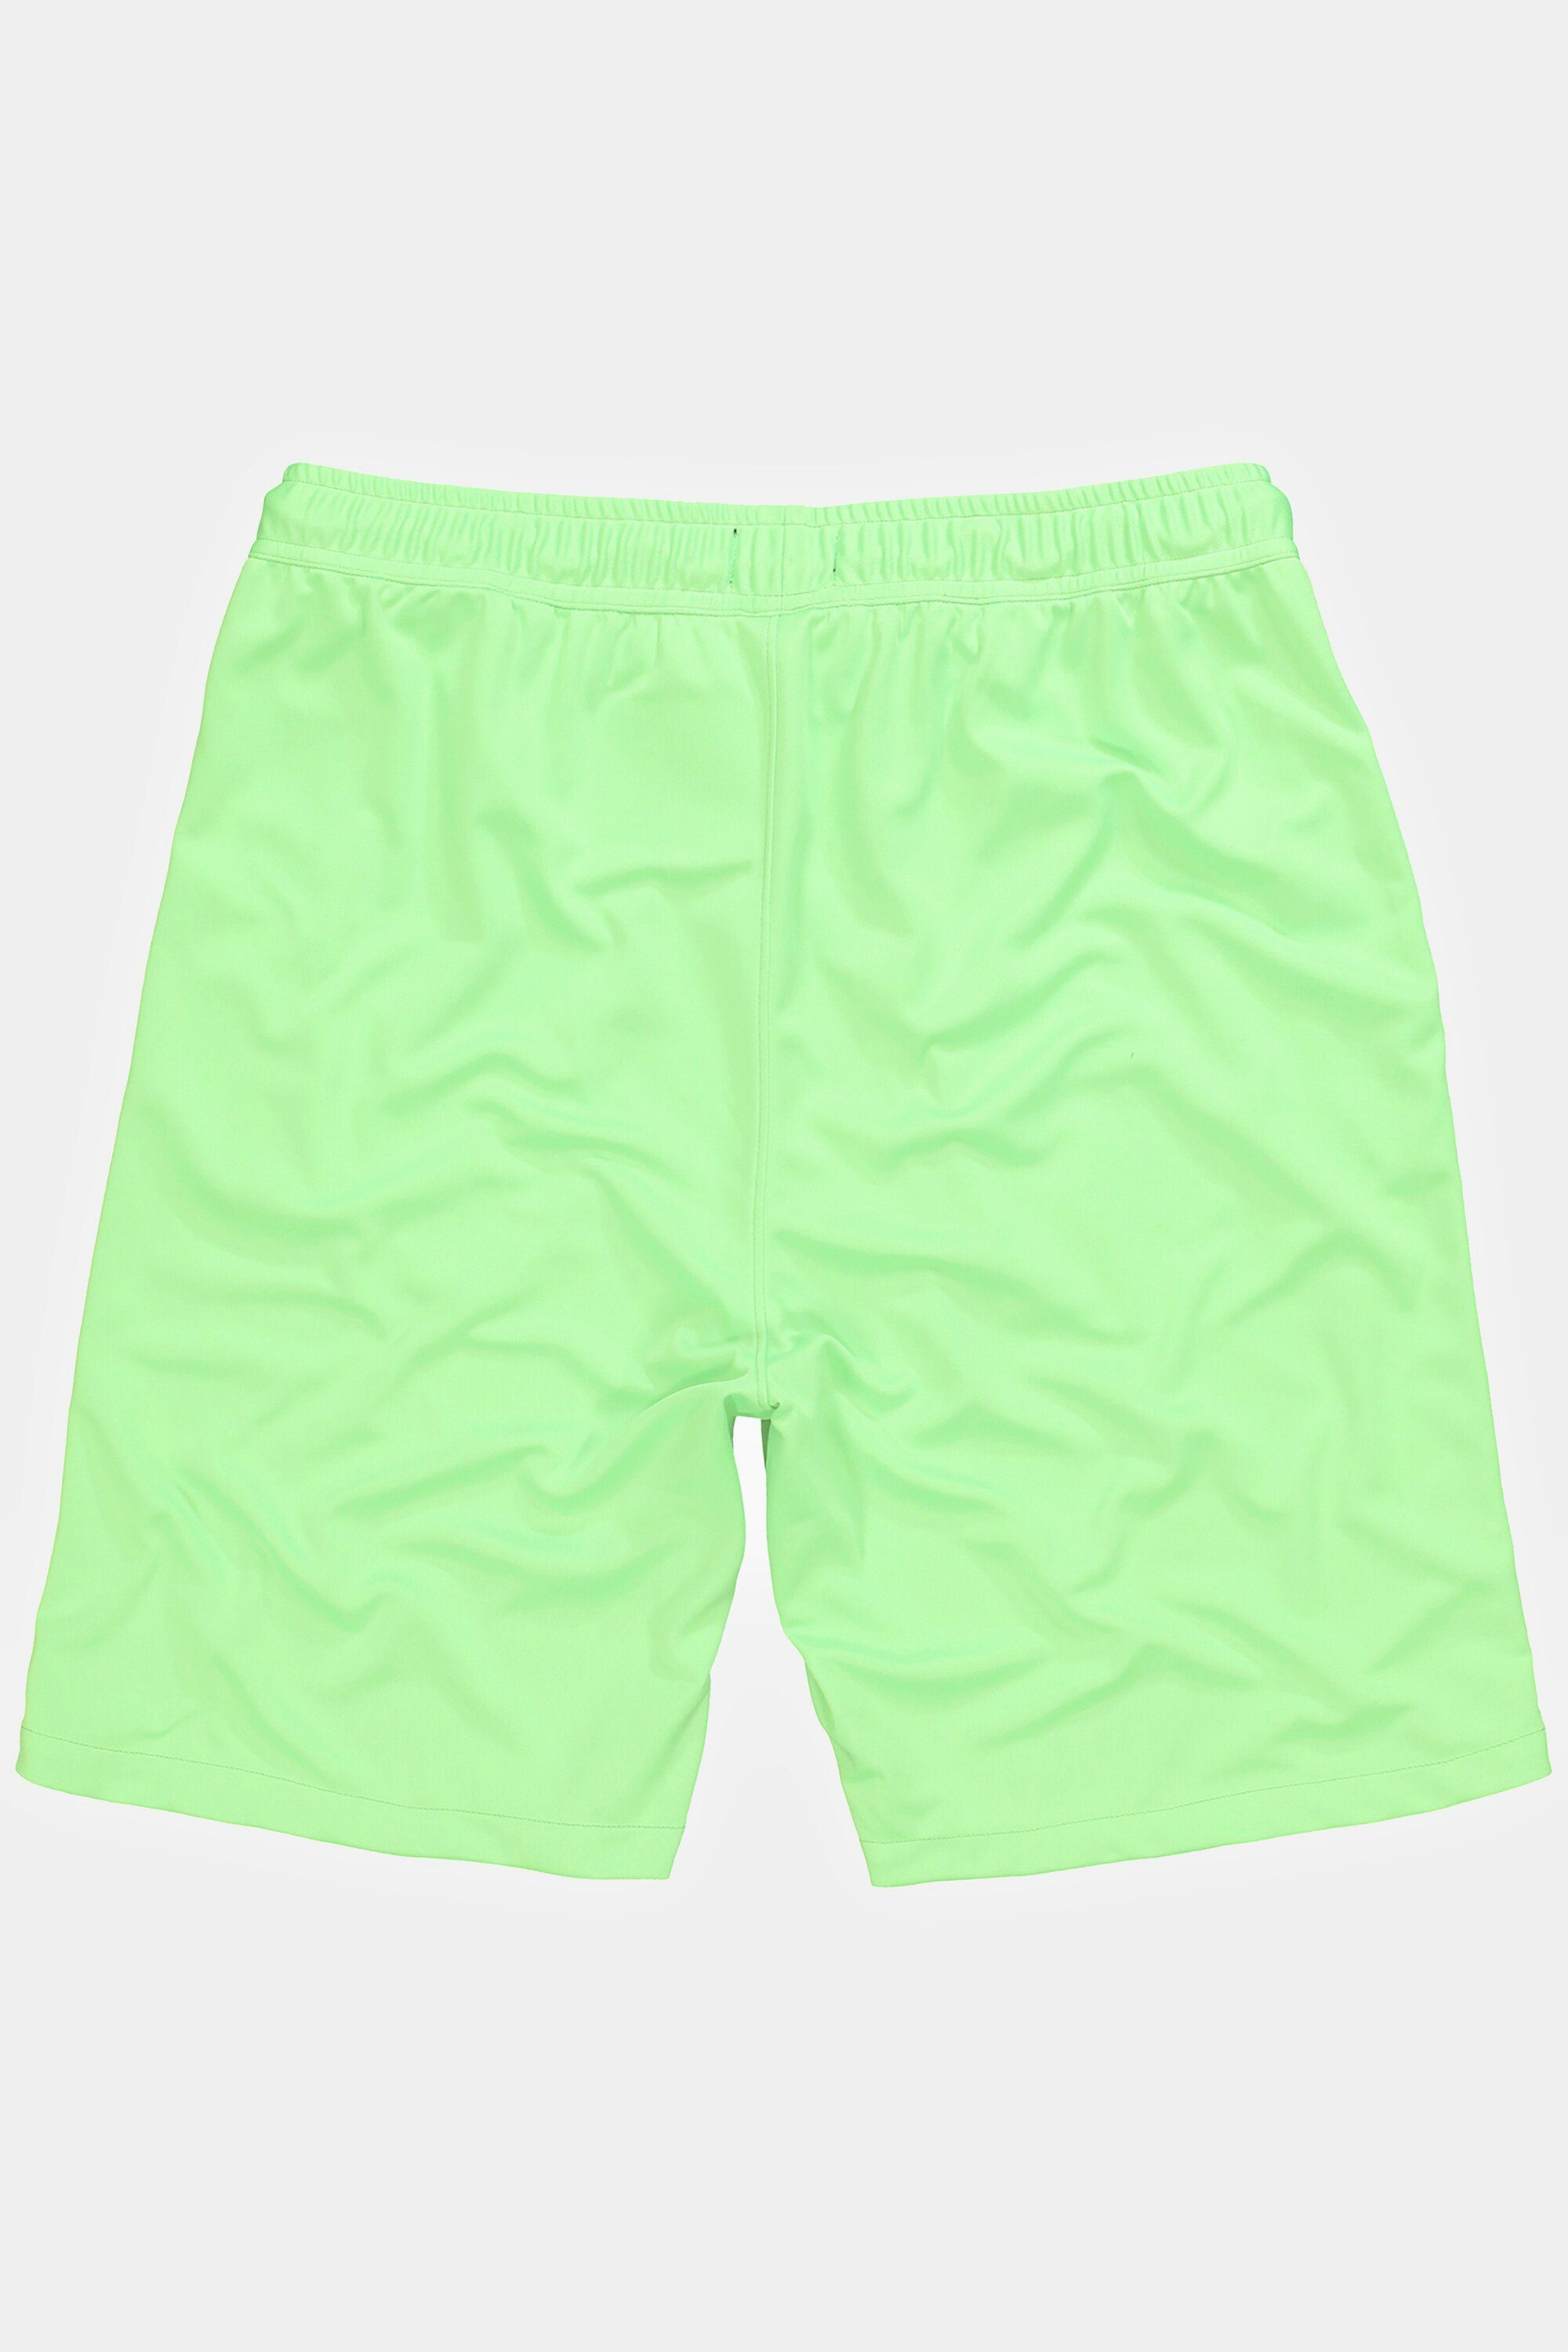 JP1880 Bermudas QuickDry Funktions-Shorts Fitness